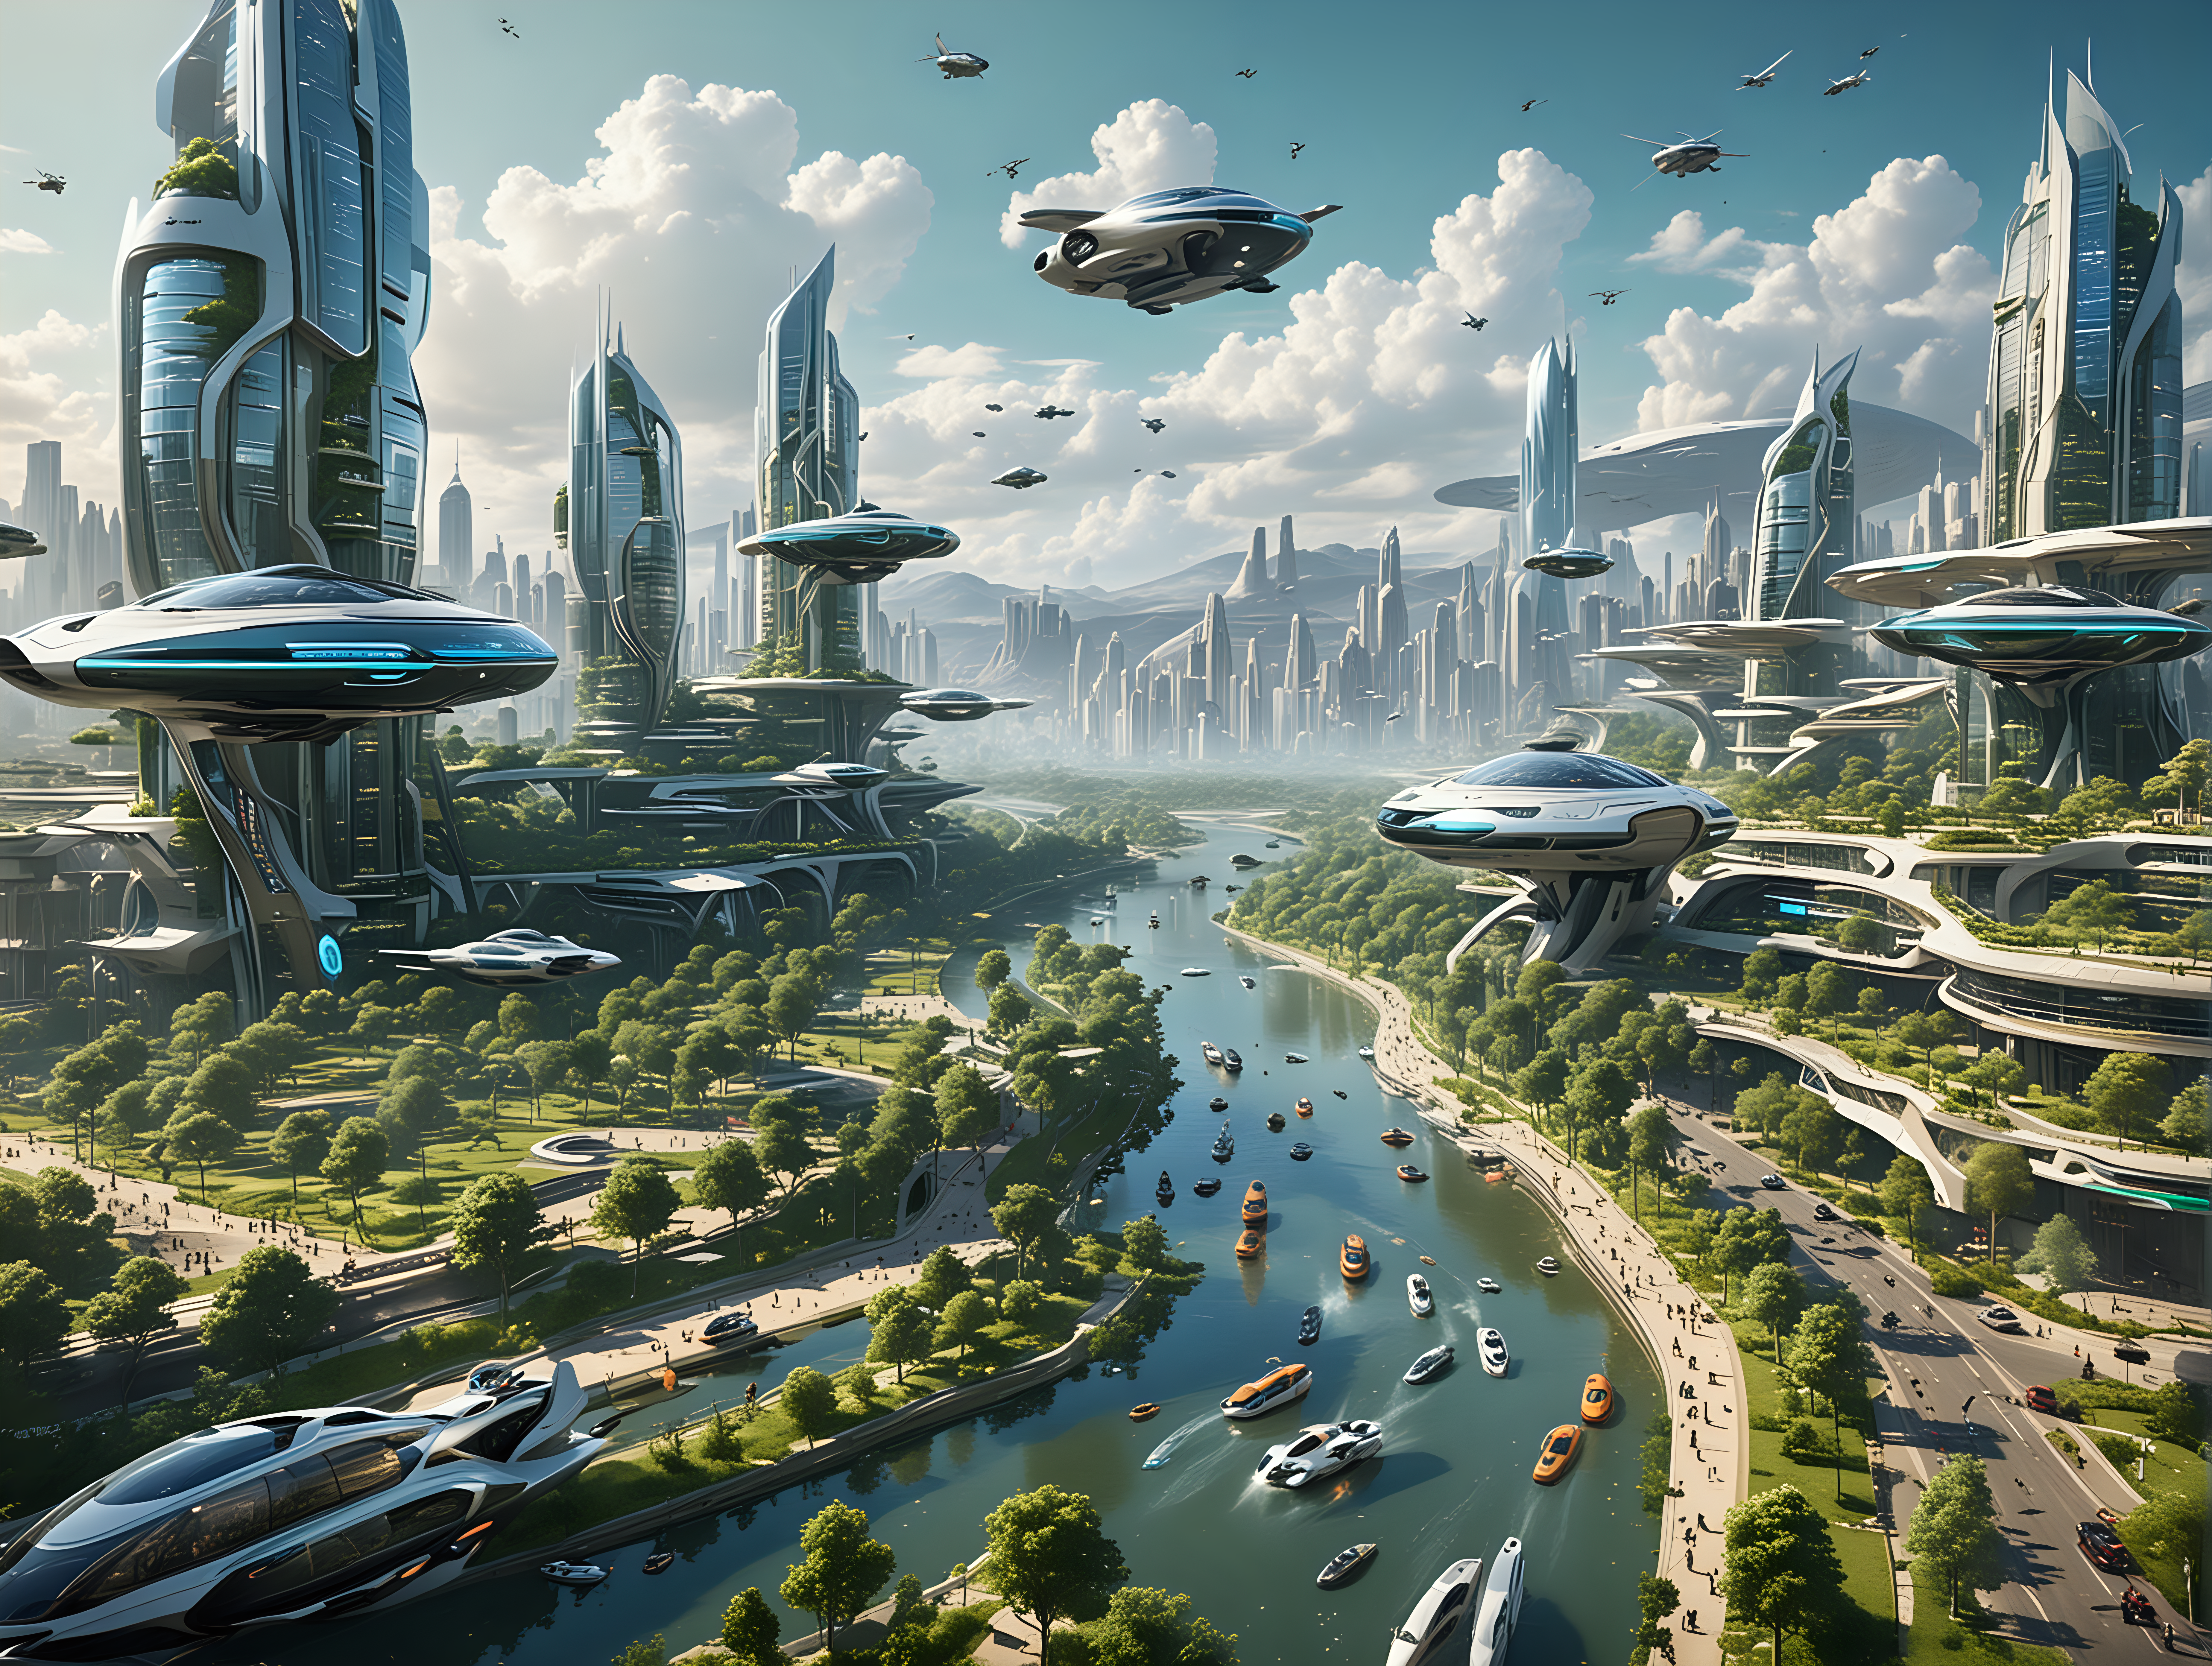 A futuristic city with, flying cars, green spaces, and parks